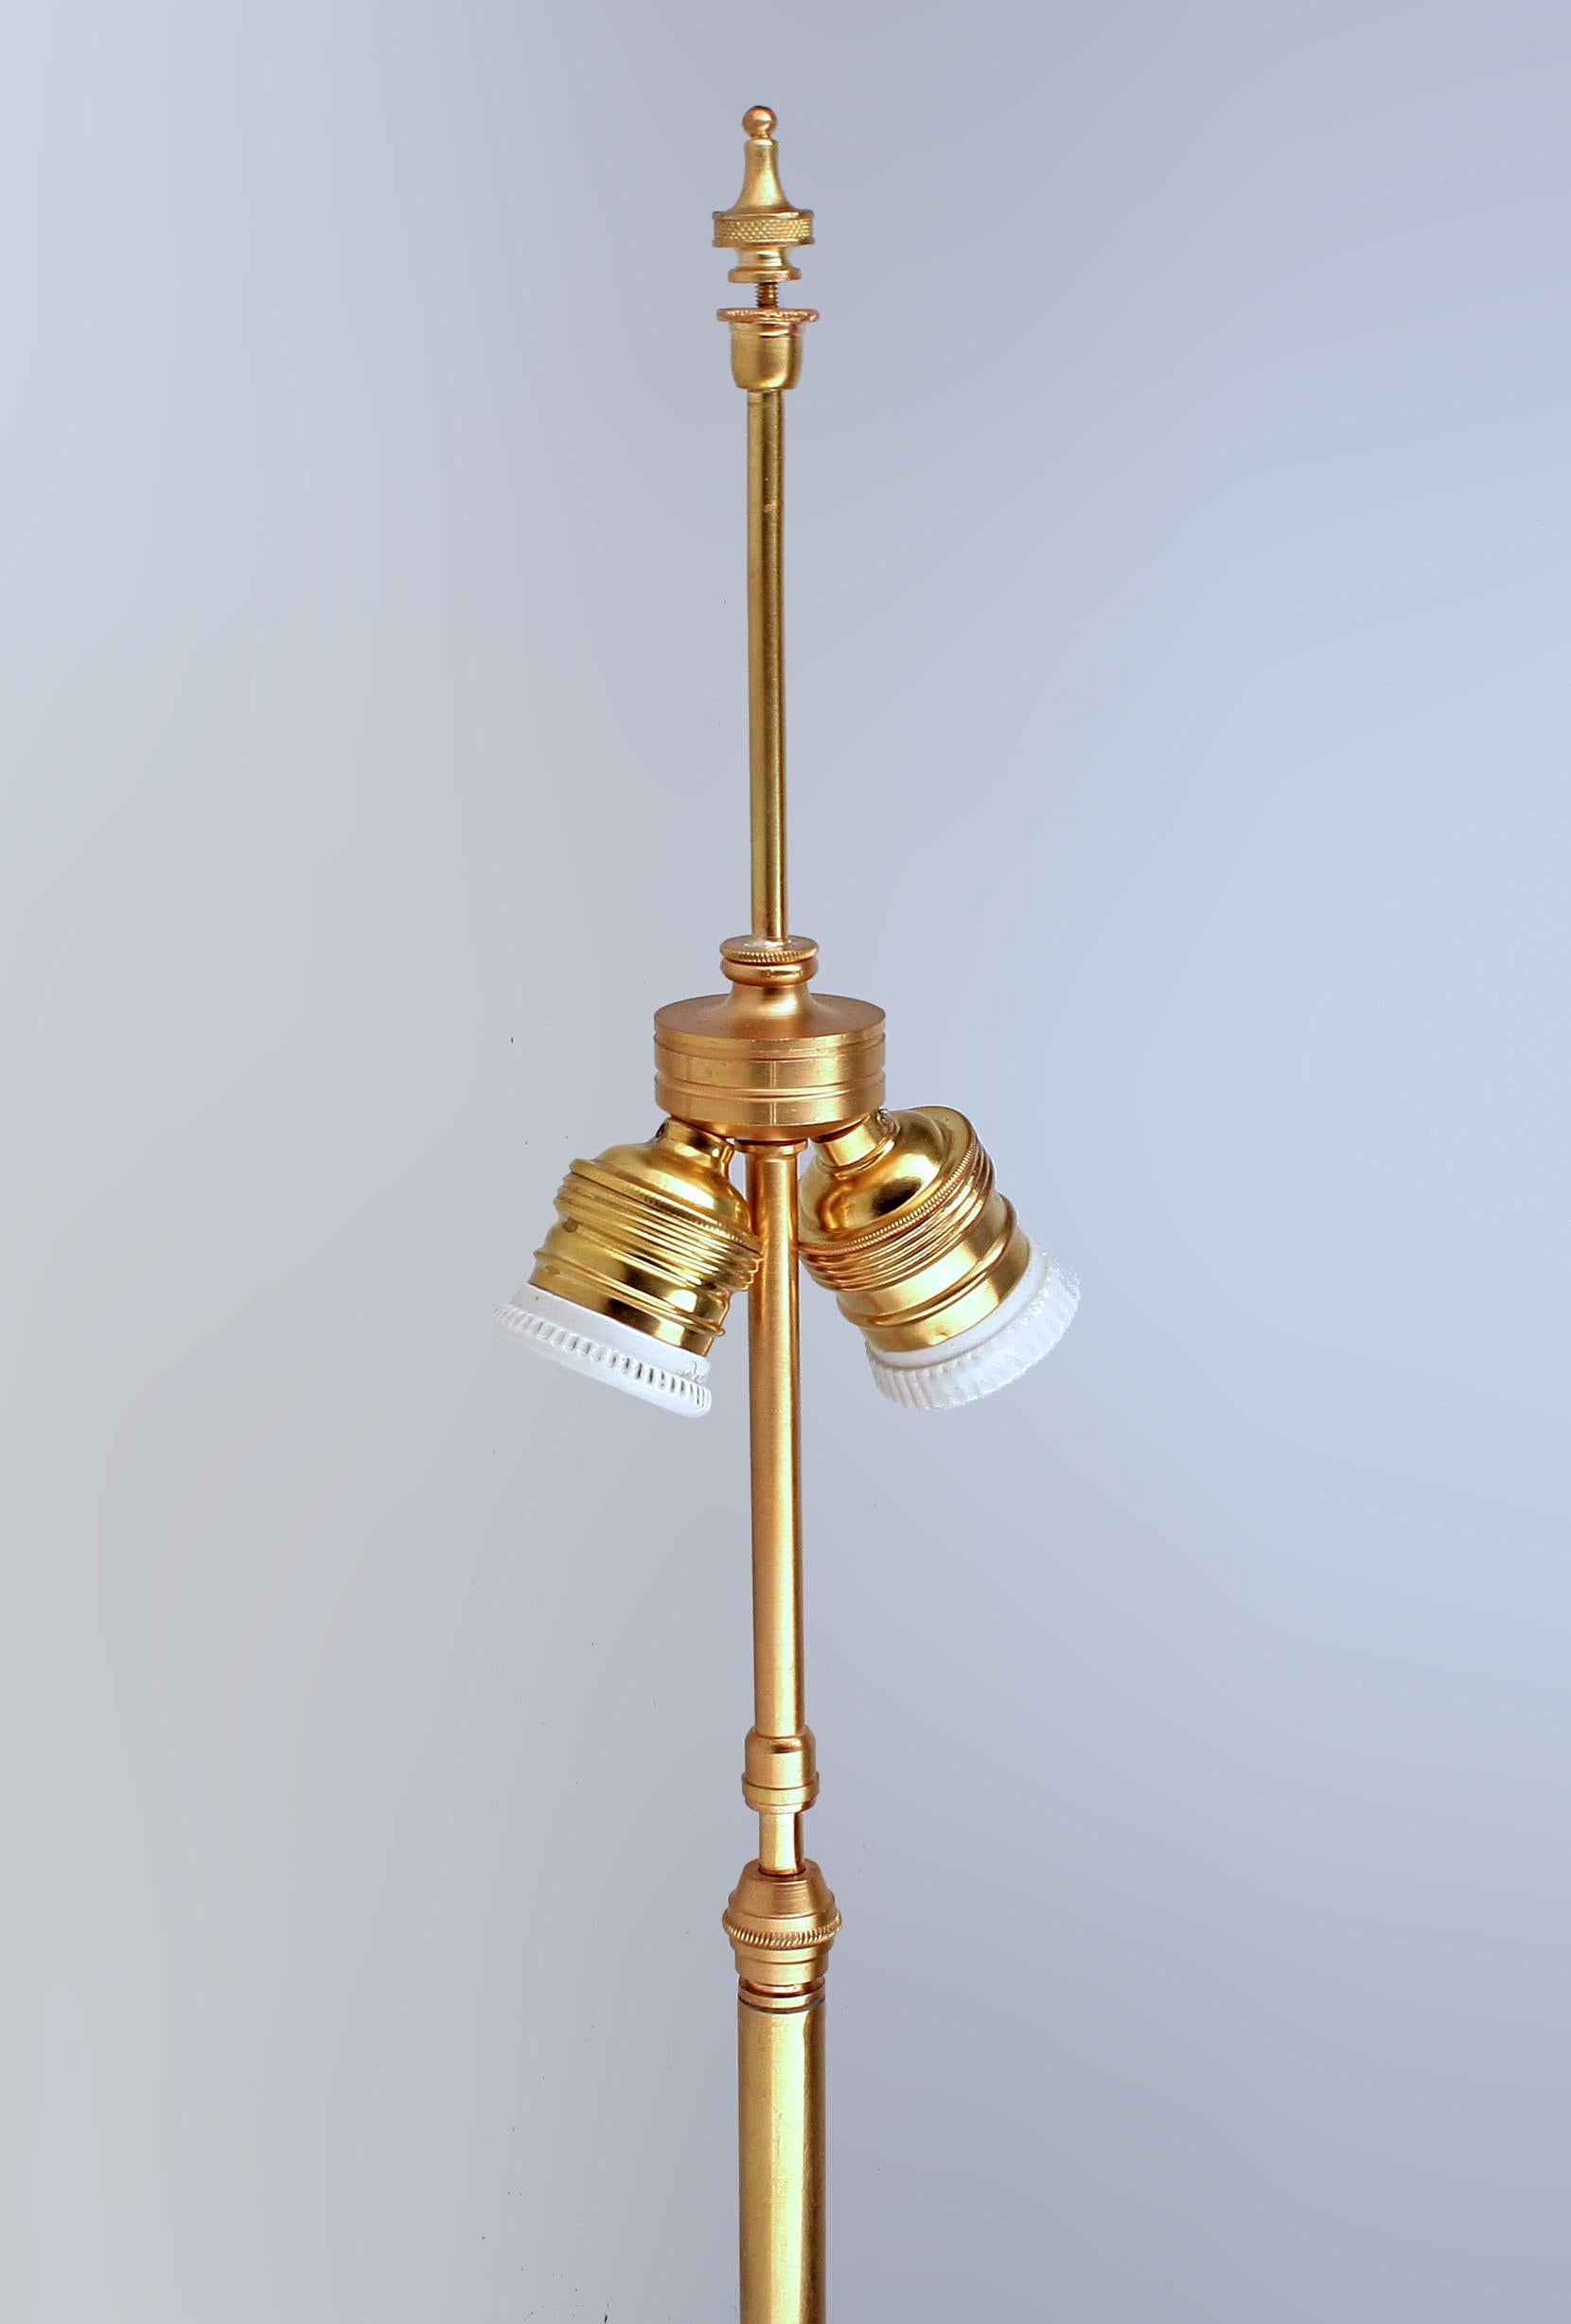 Patinated Late 19th C. French Ormolu/Gilt Bronze Arrow-Shaped Floor Lamp by Maison Jansen For Sale